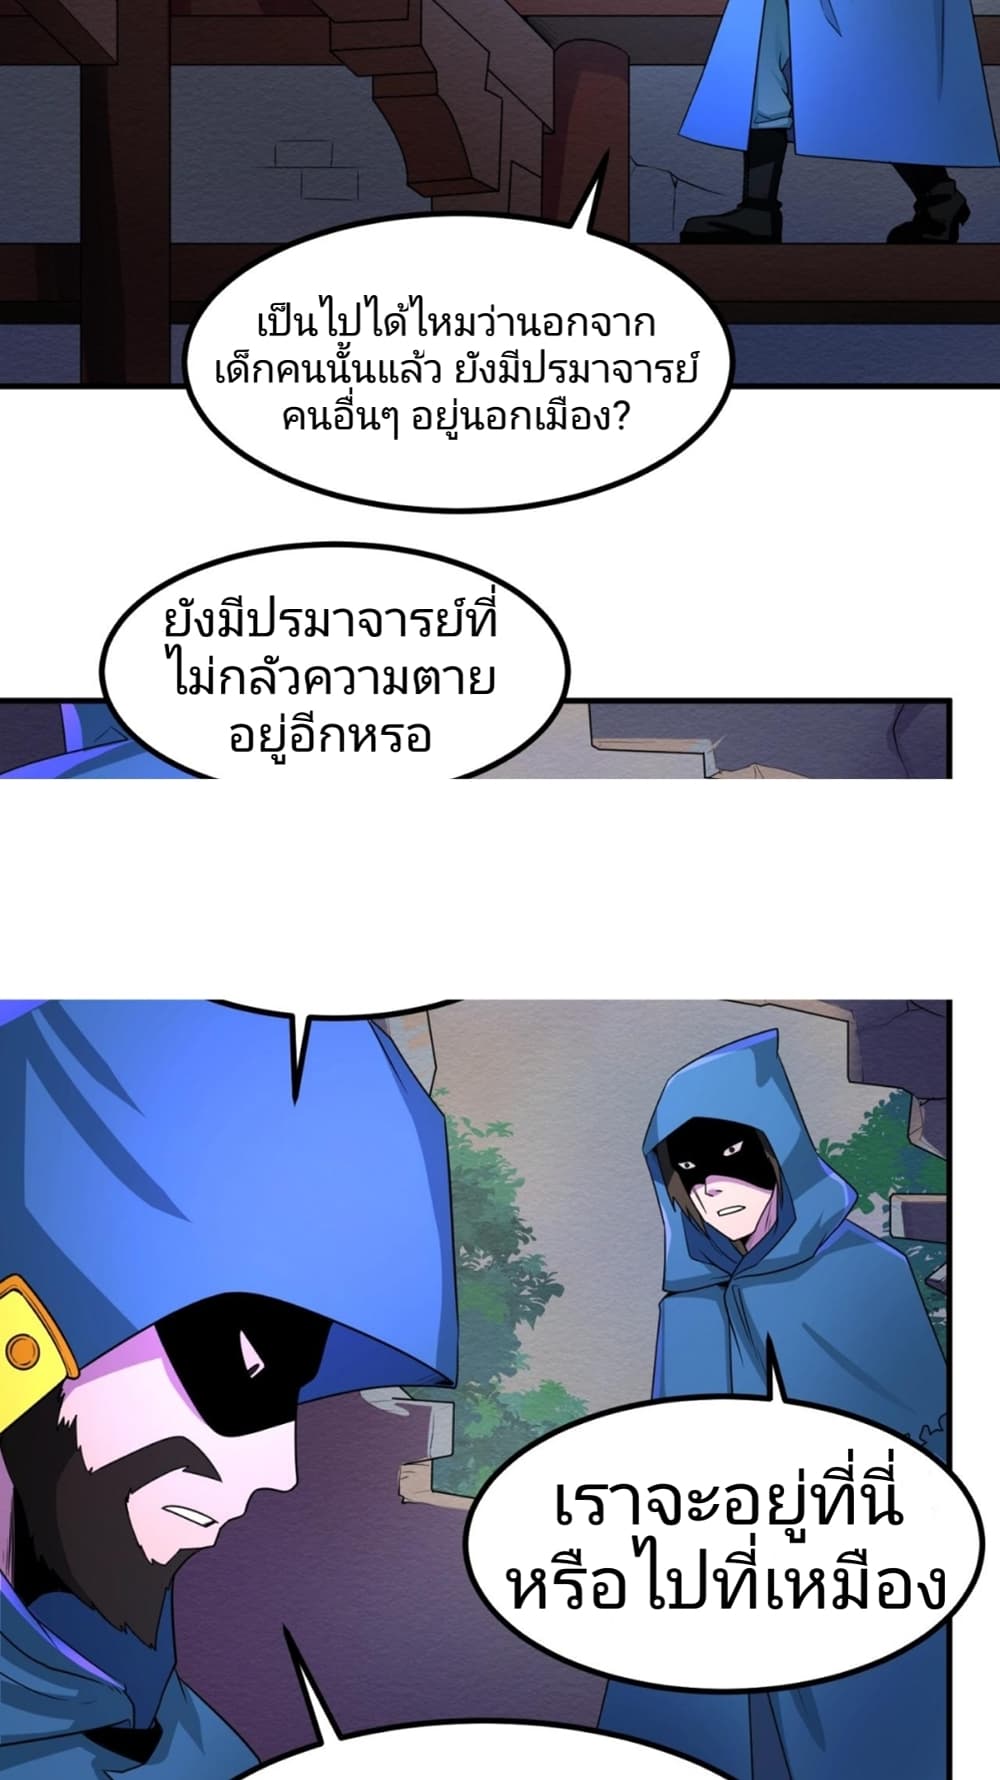 The Age of Ghost Spirits à¸à¸­à¸à¸à¸µà¹ 9 (34)